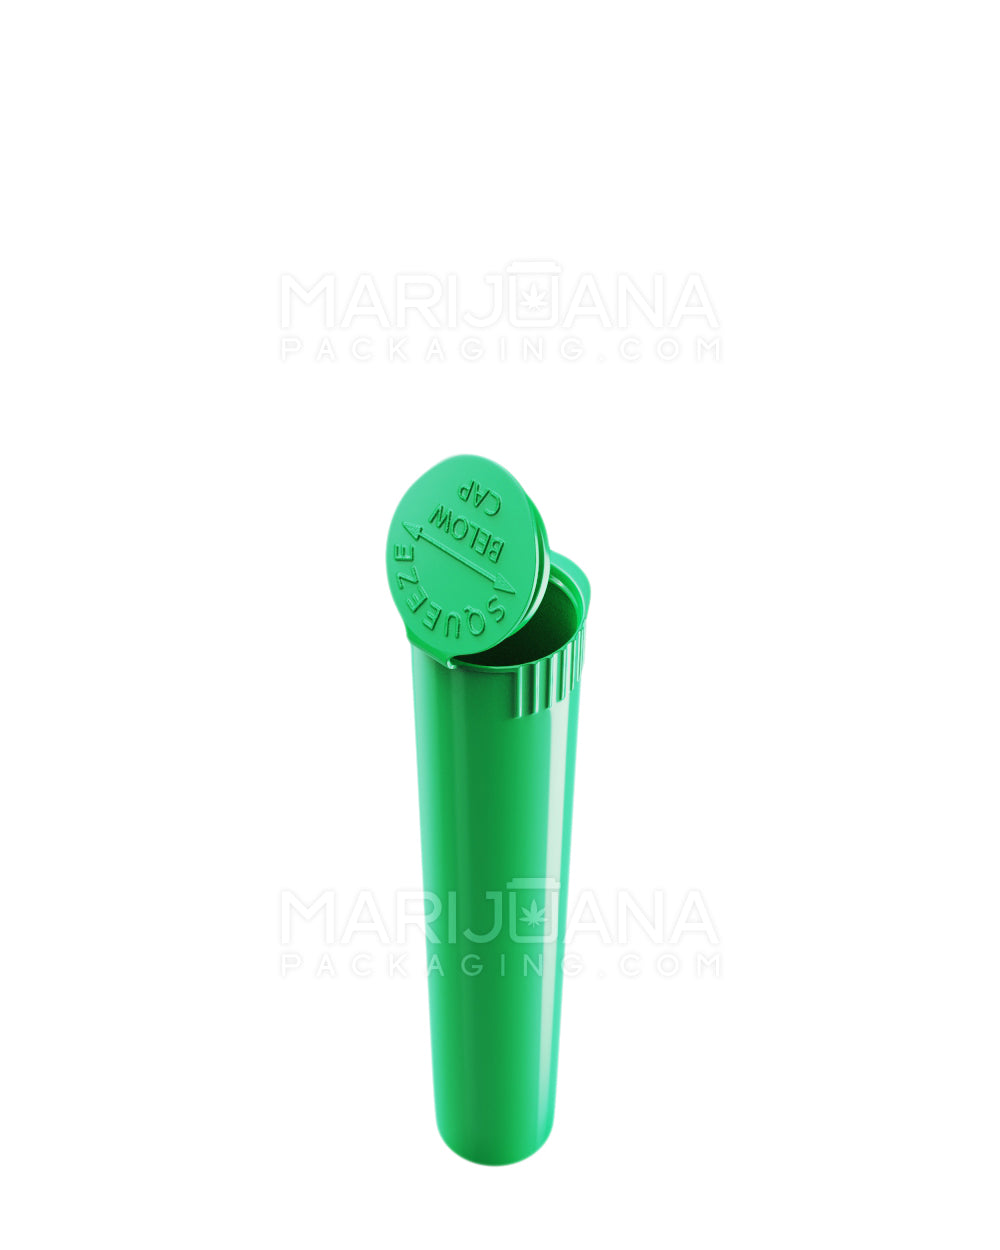 Child Resistant | Pop Top Opaque Plastic Pre-Roll Tubes | 95mm - Green - 1000 Count - 2